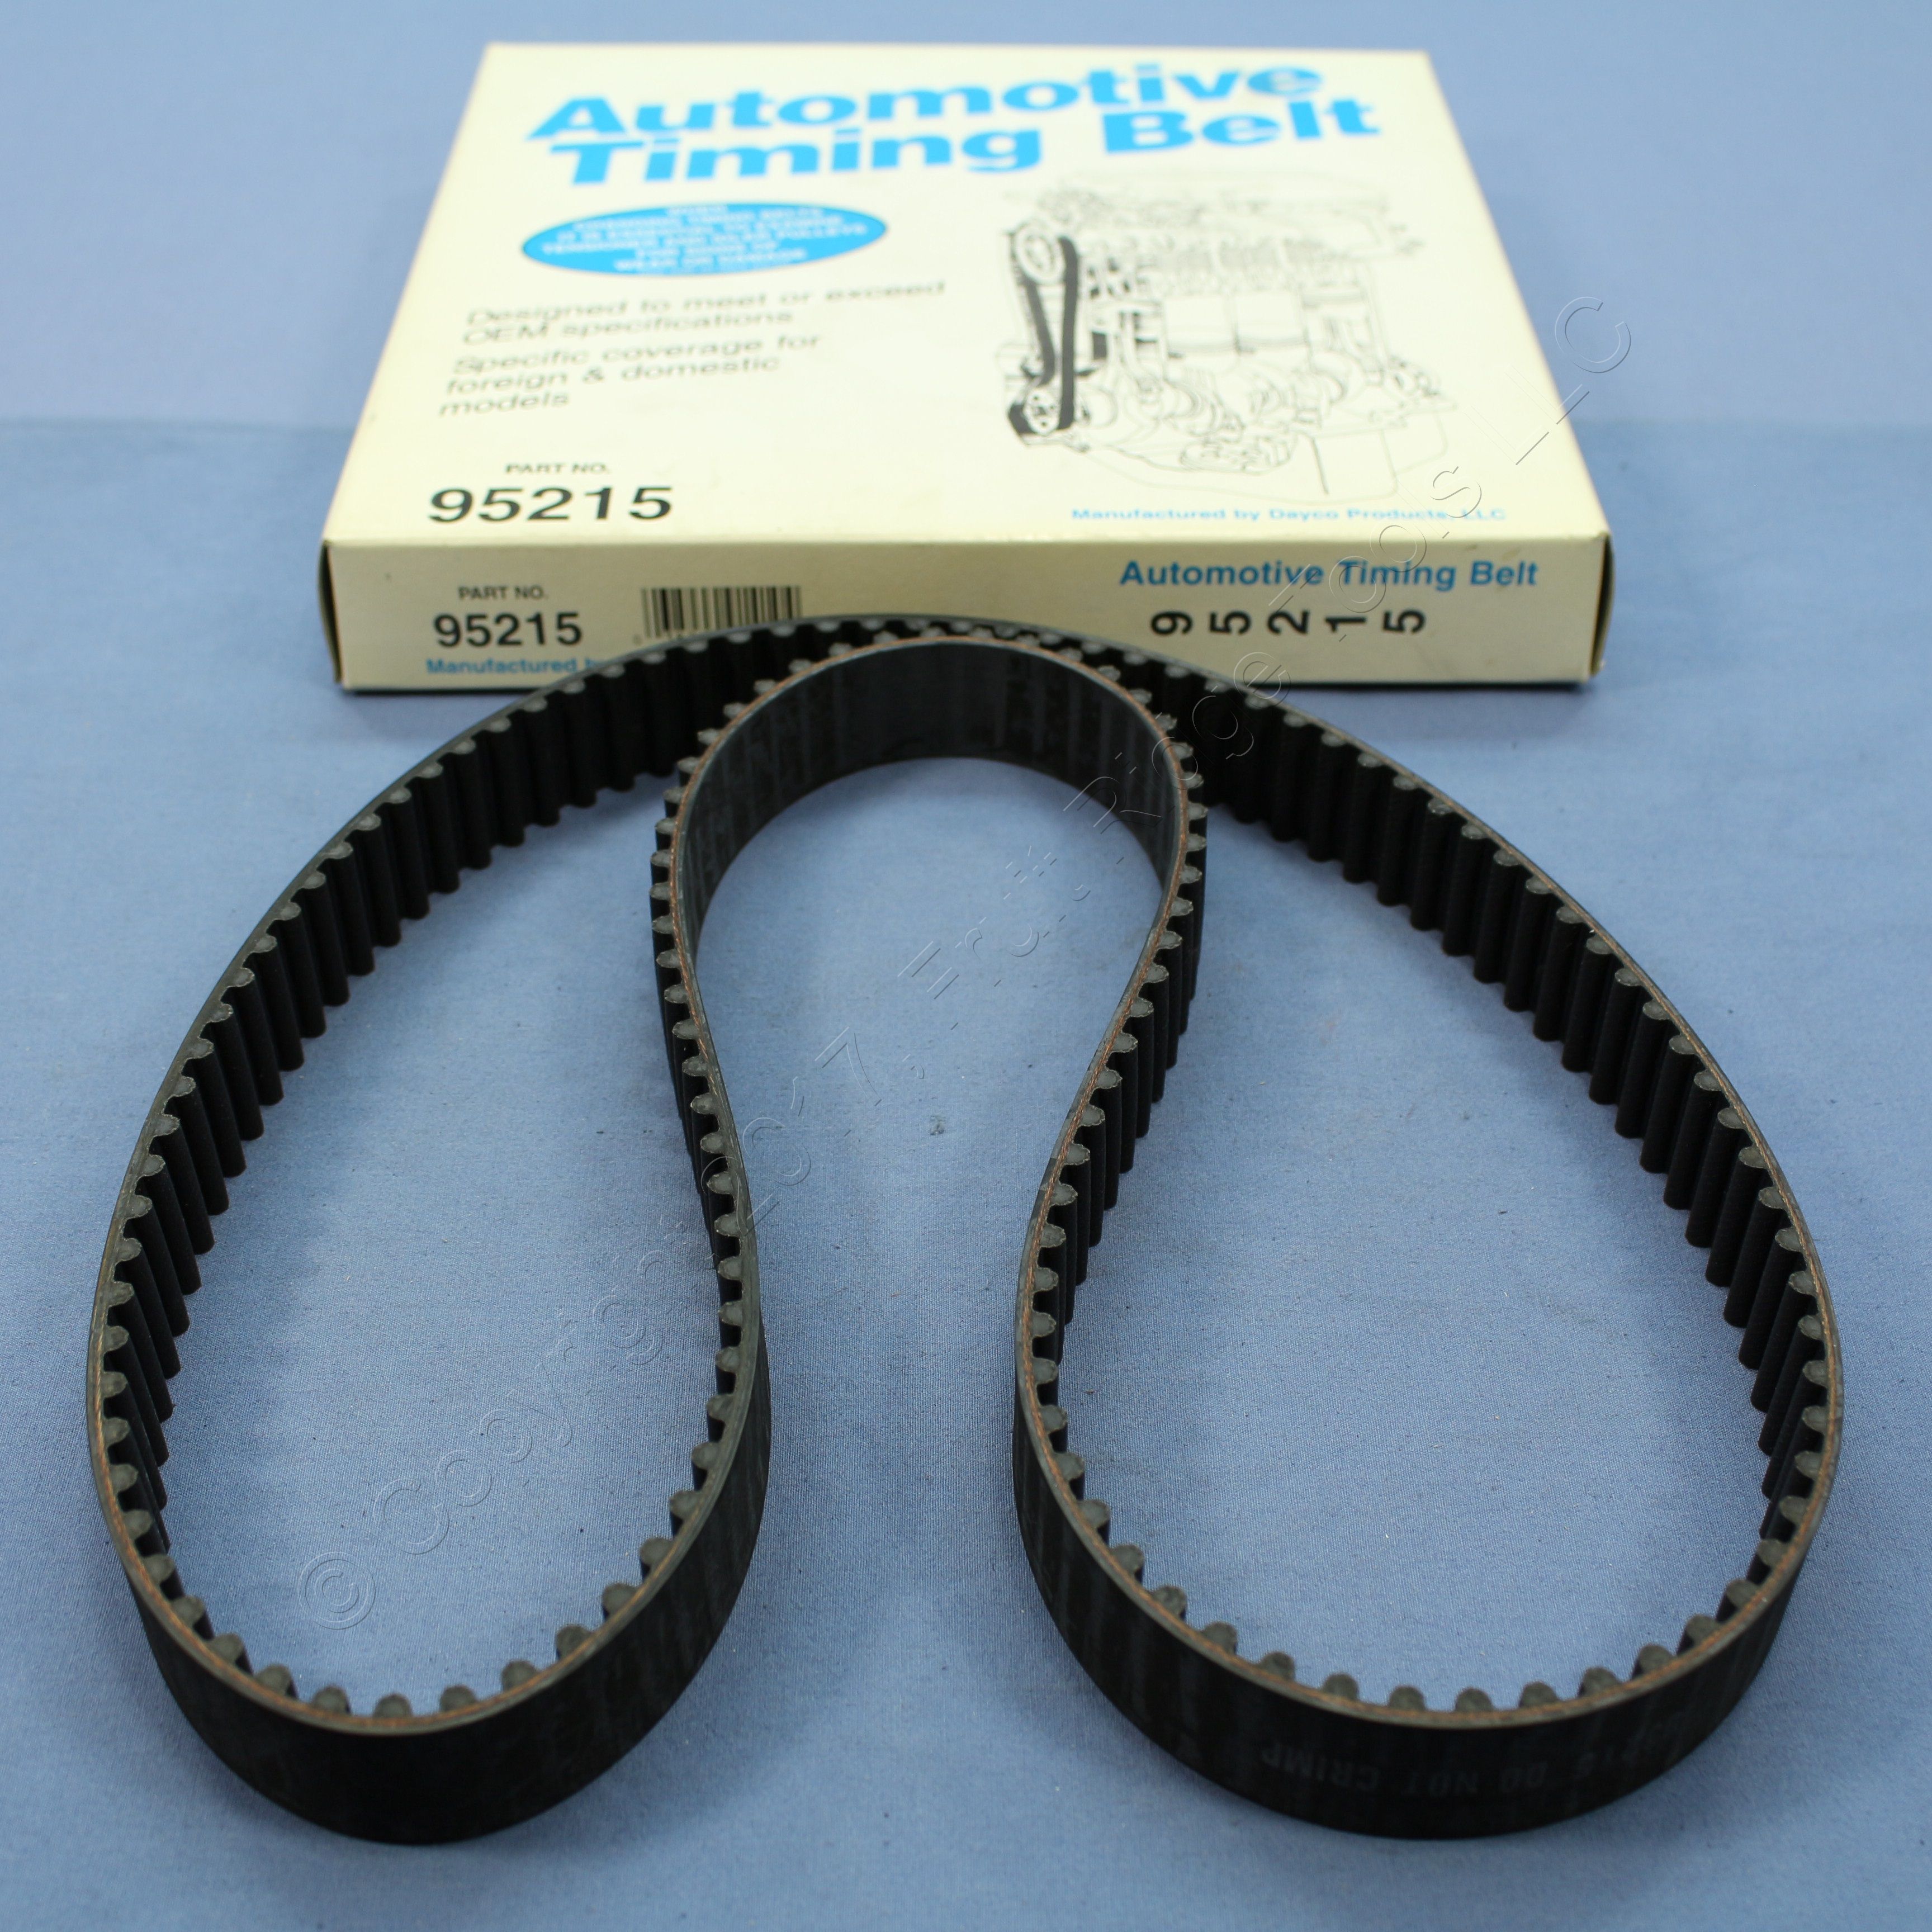 Engine Timing Belt DAYCO PRODUCTS LLC 95215 for sale online | eBay